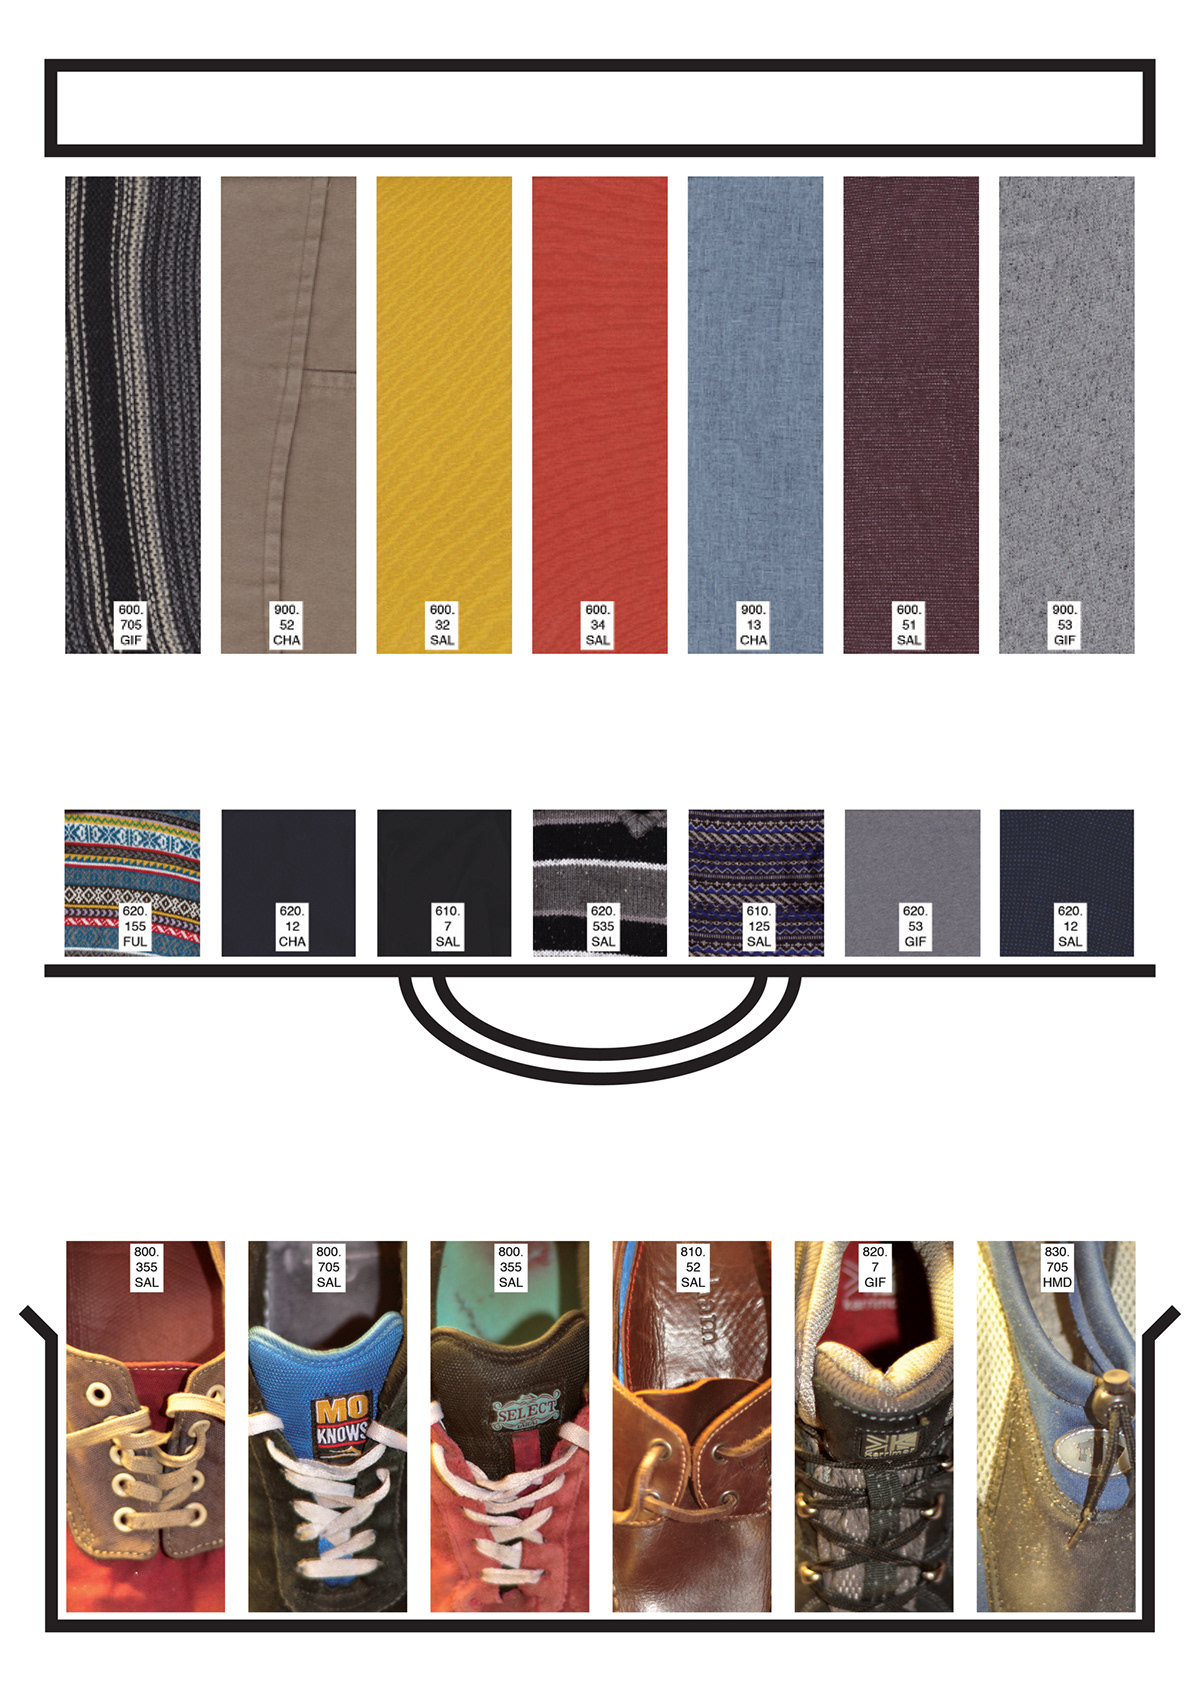 dewey system library Clothing Catalogue Oraganise colour code hierarchy